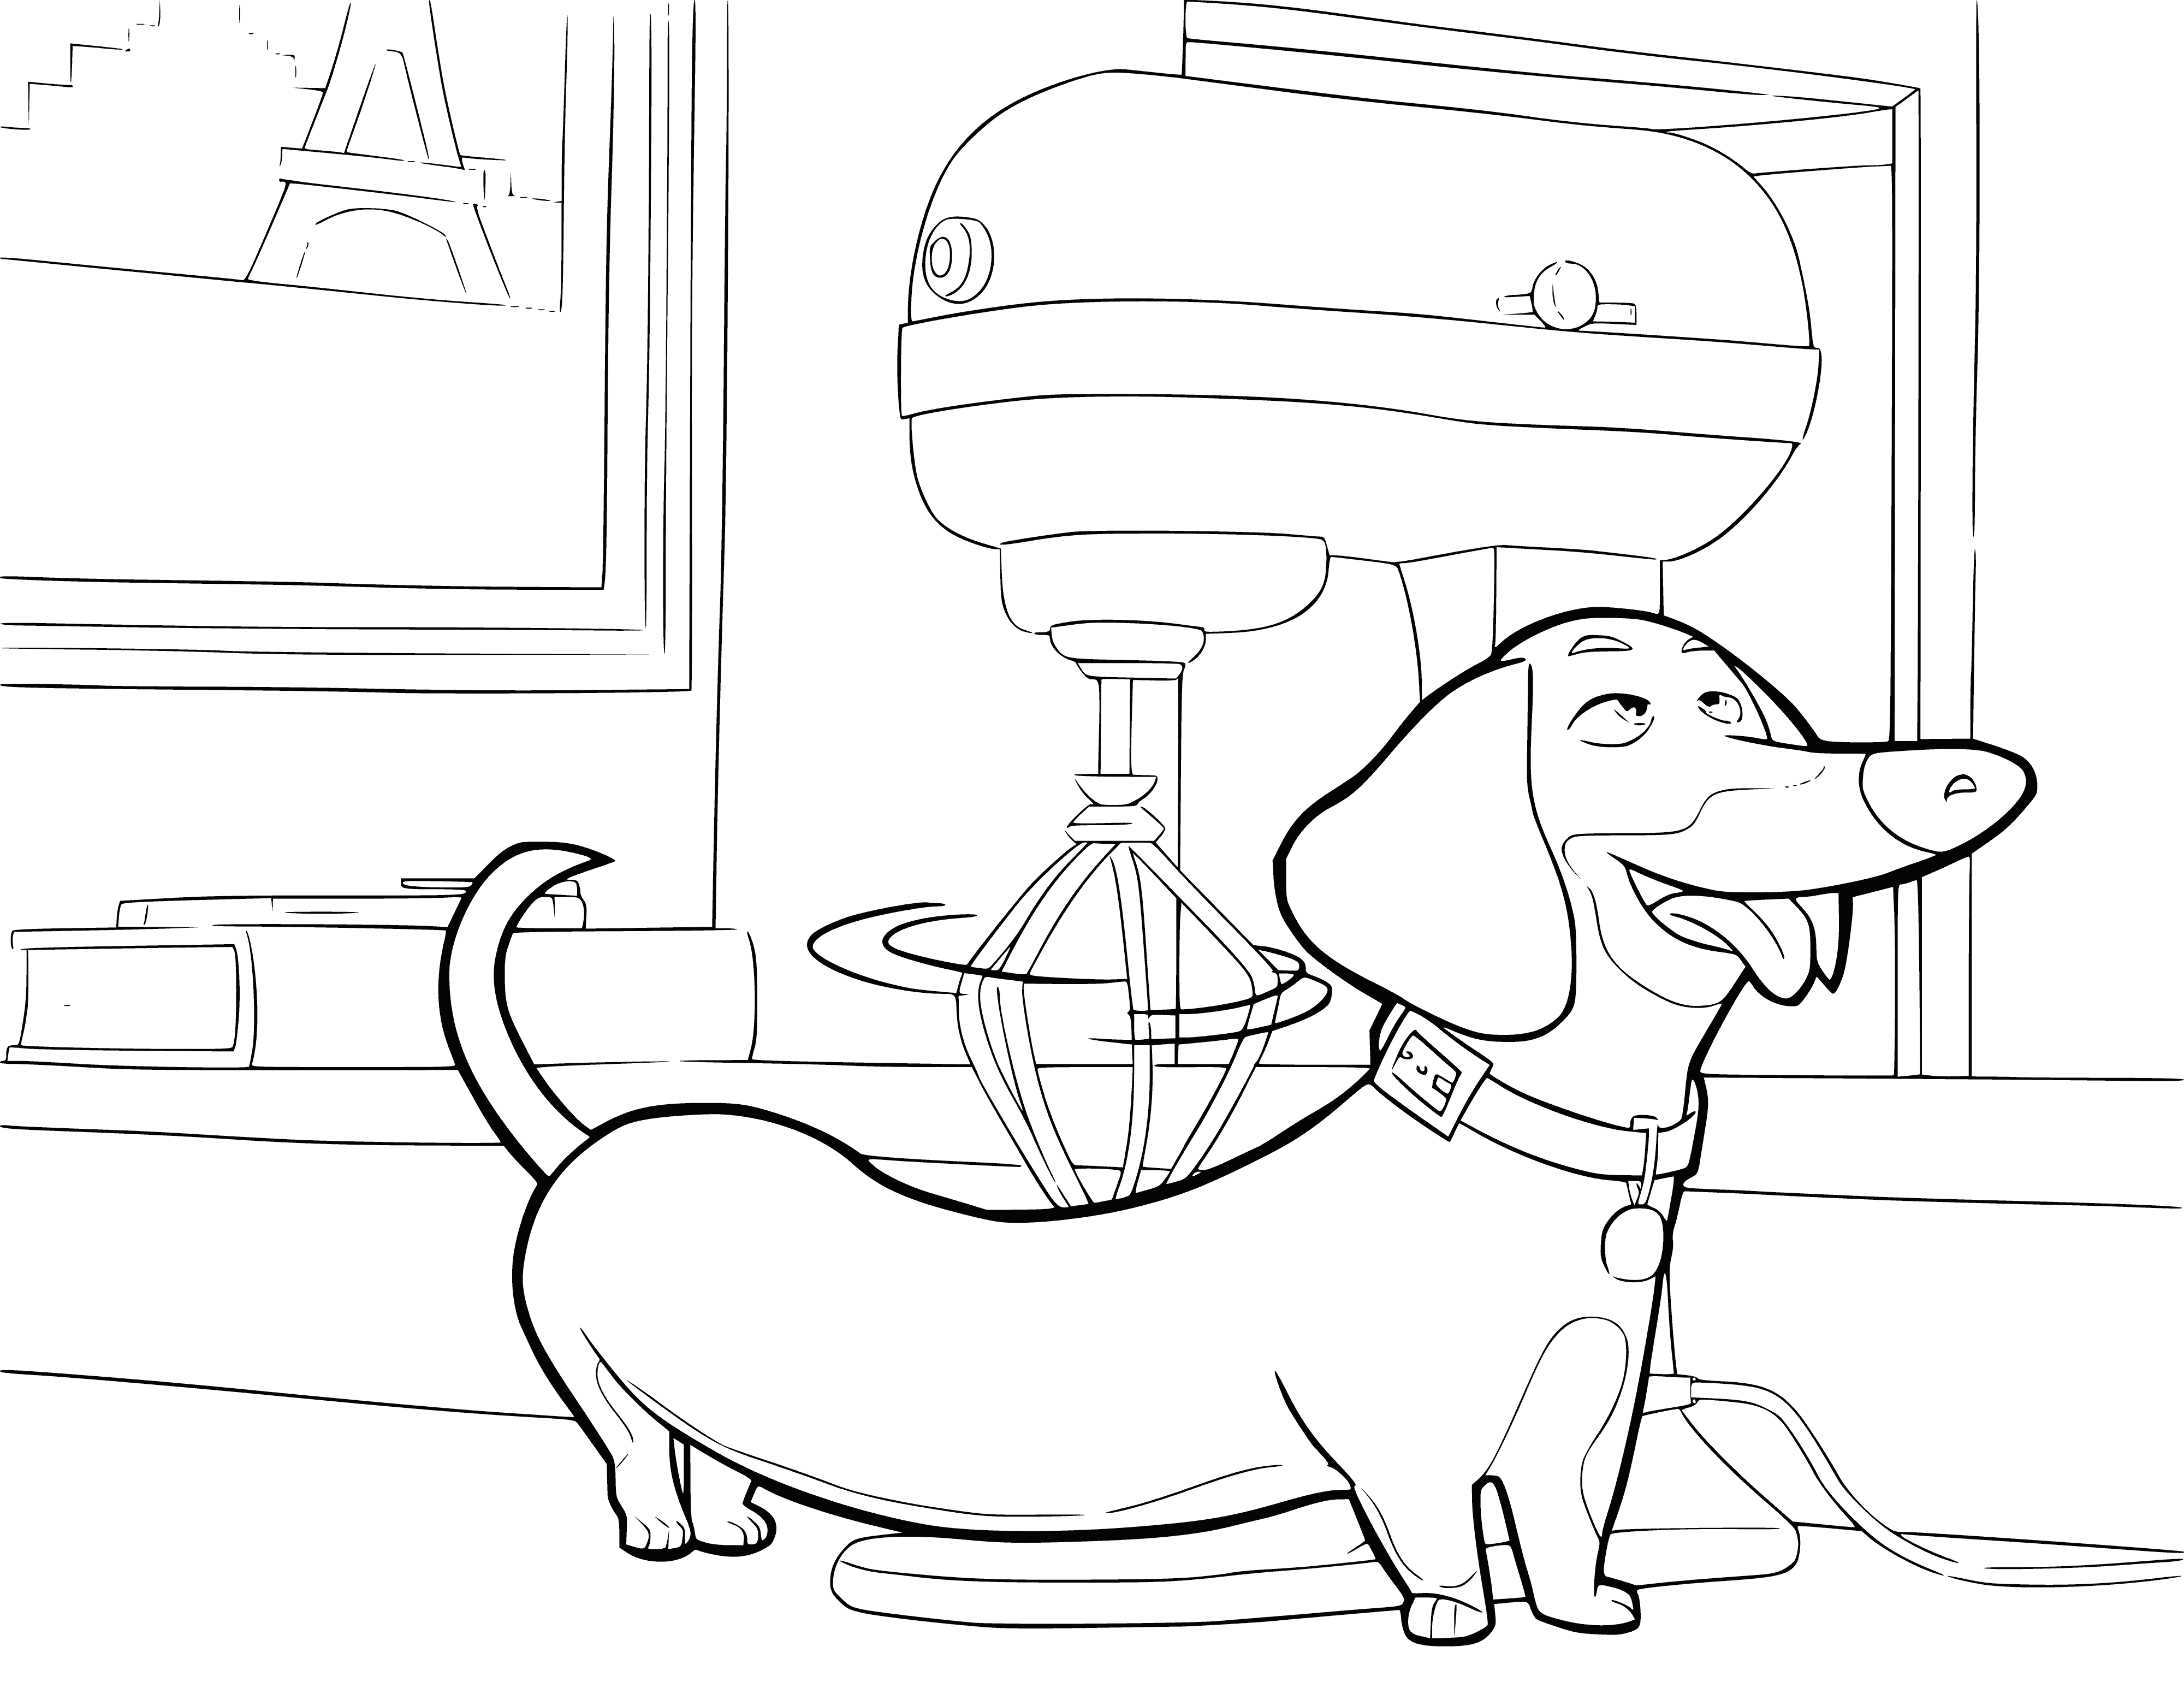 coloring page: Dog and cat in front of a fence; dog has tongue out and cat has yellow eyes.